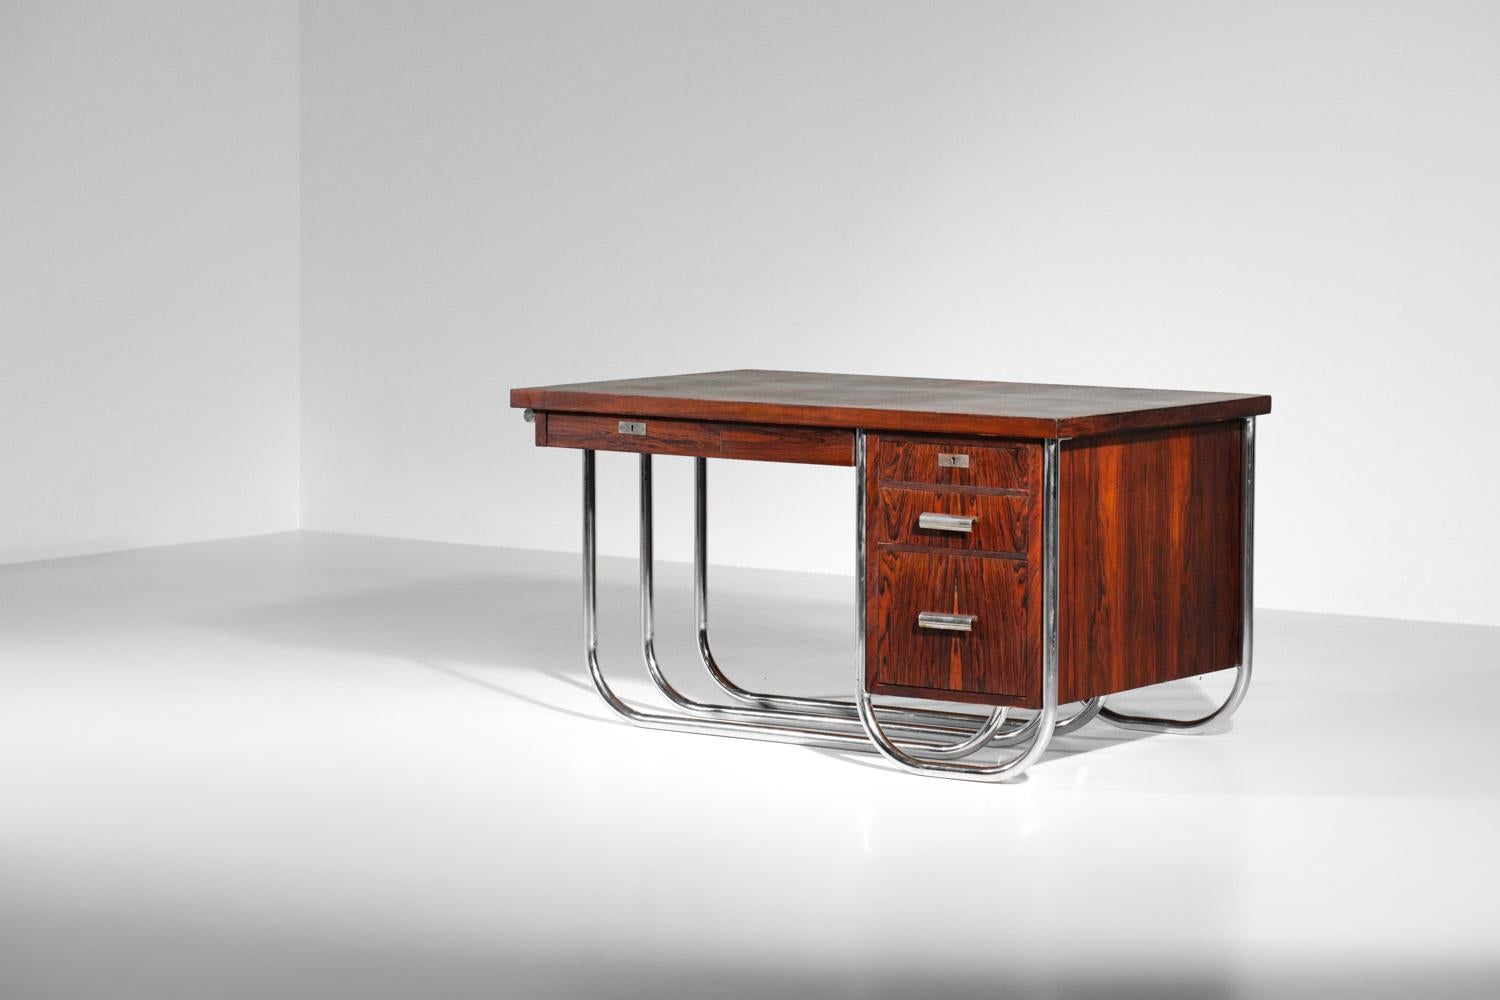 French desk from the 40s / 50s in modernist Bauhaus style. Structure of the desk in veneered and solid Rio rosewood with a triple tubular base in chromed steel quite rare. The desk is composed of a 3 drawer pedestal and a fourth central drawer. Nice